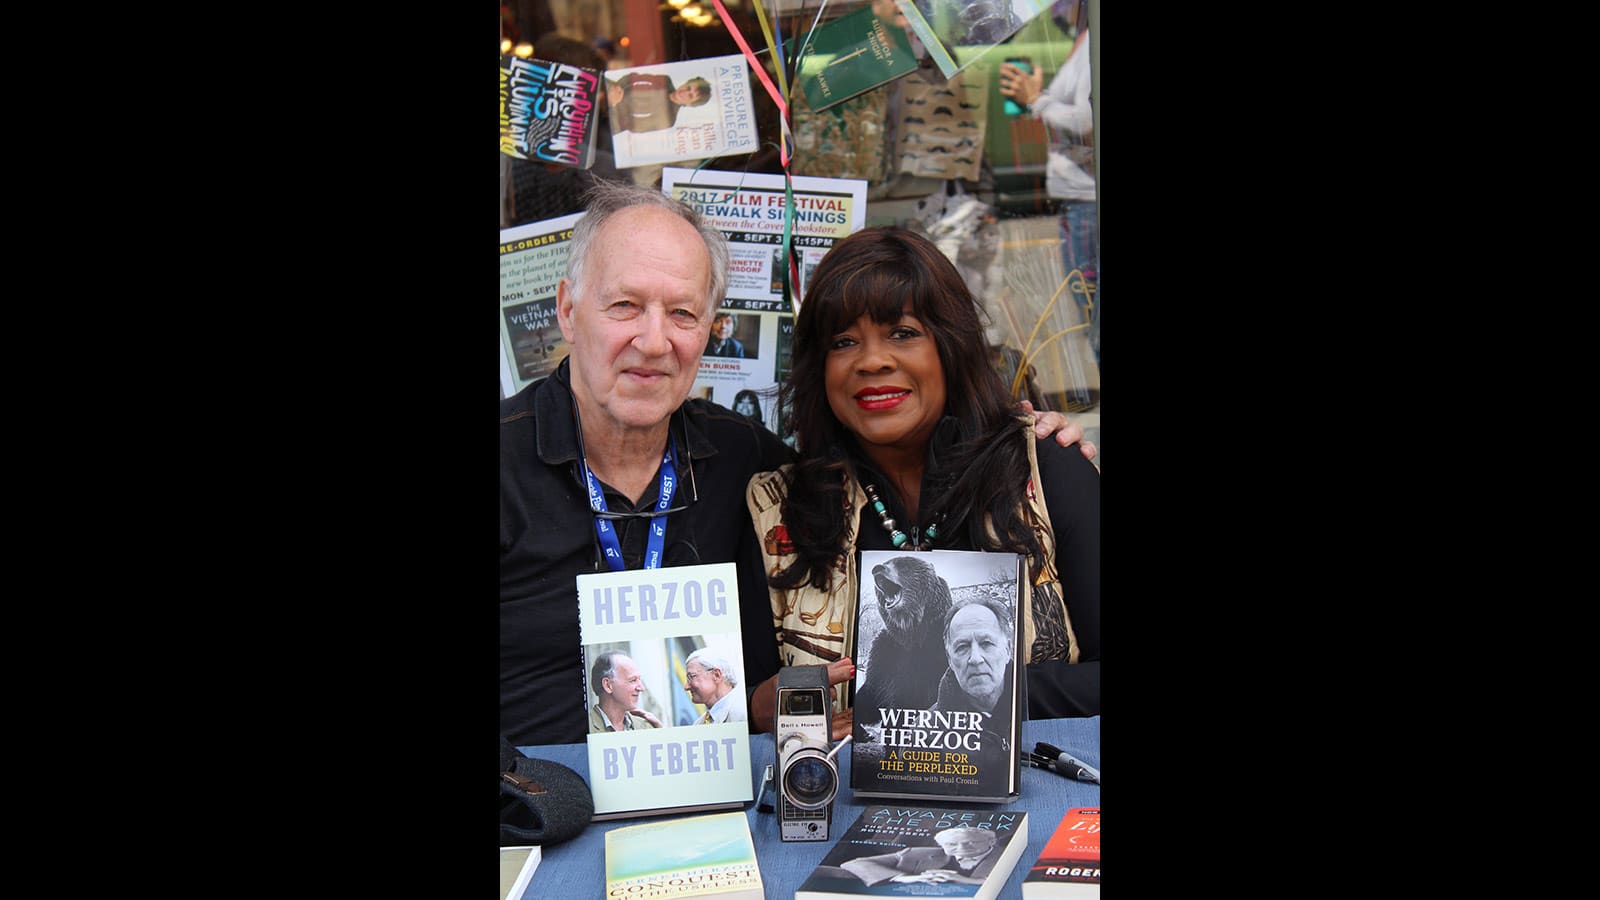 Werner Herzog and Chaz Ebert, wife of the late Roger Ebert, participate in a book signing on Telluride’s main street.